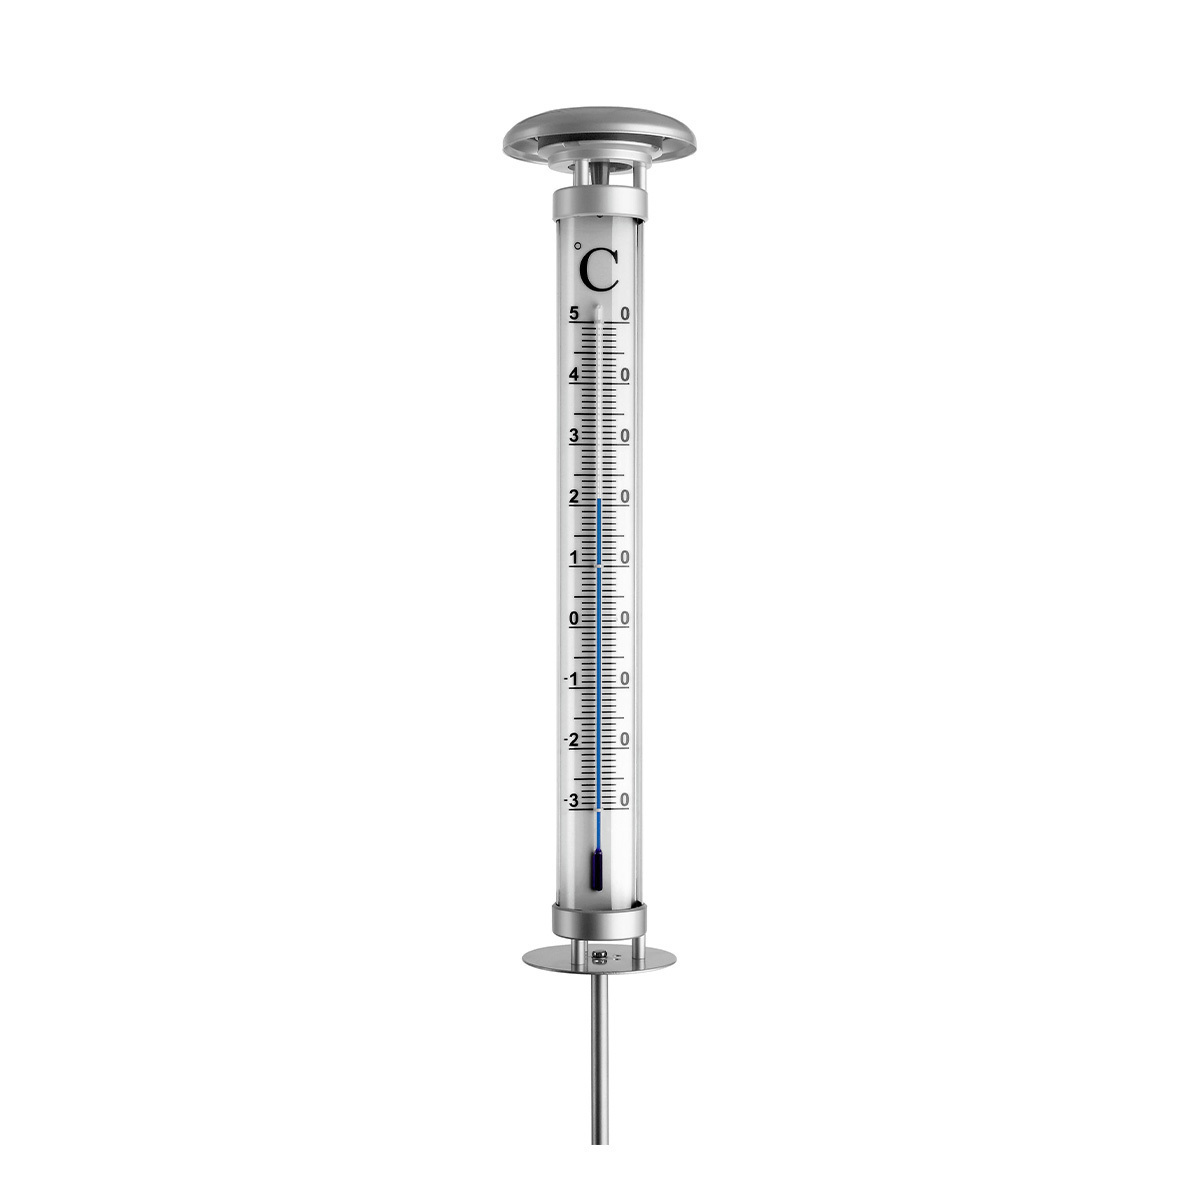 Image of TFA 12.2057 garden thermometer